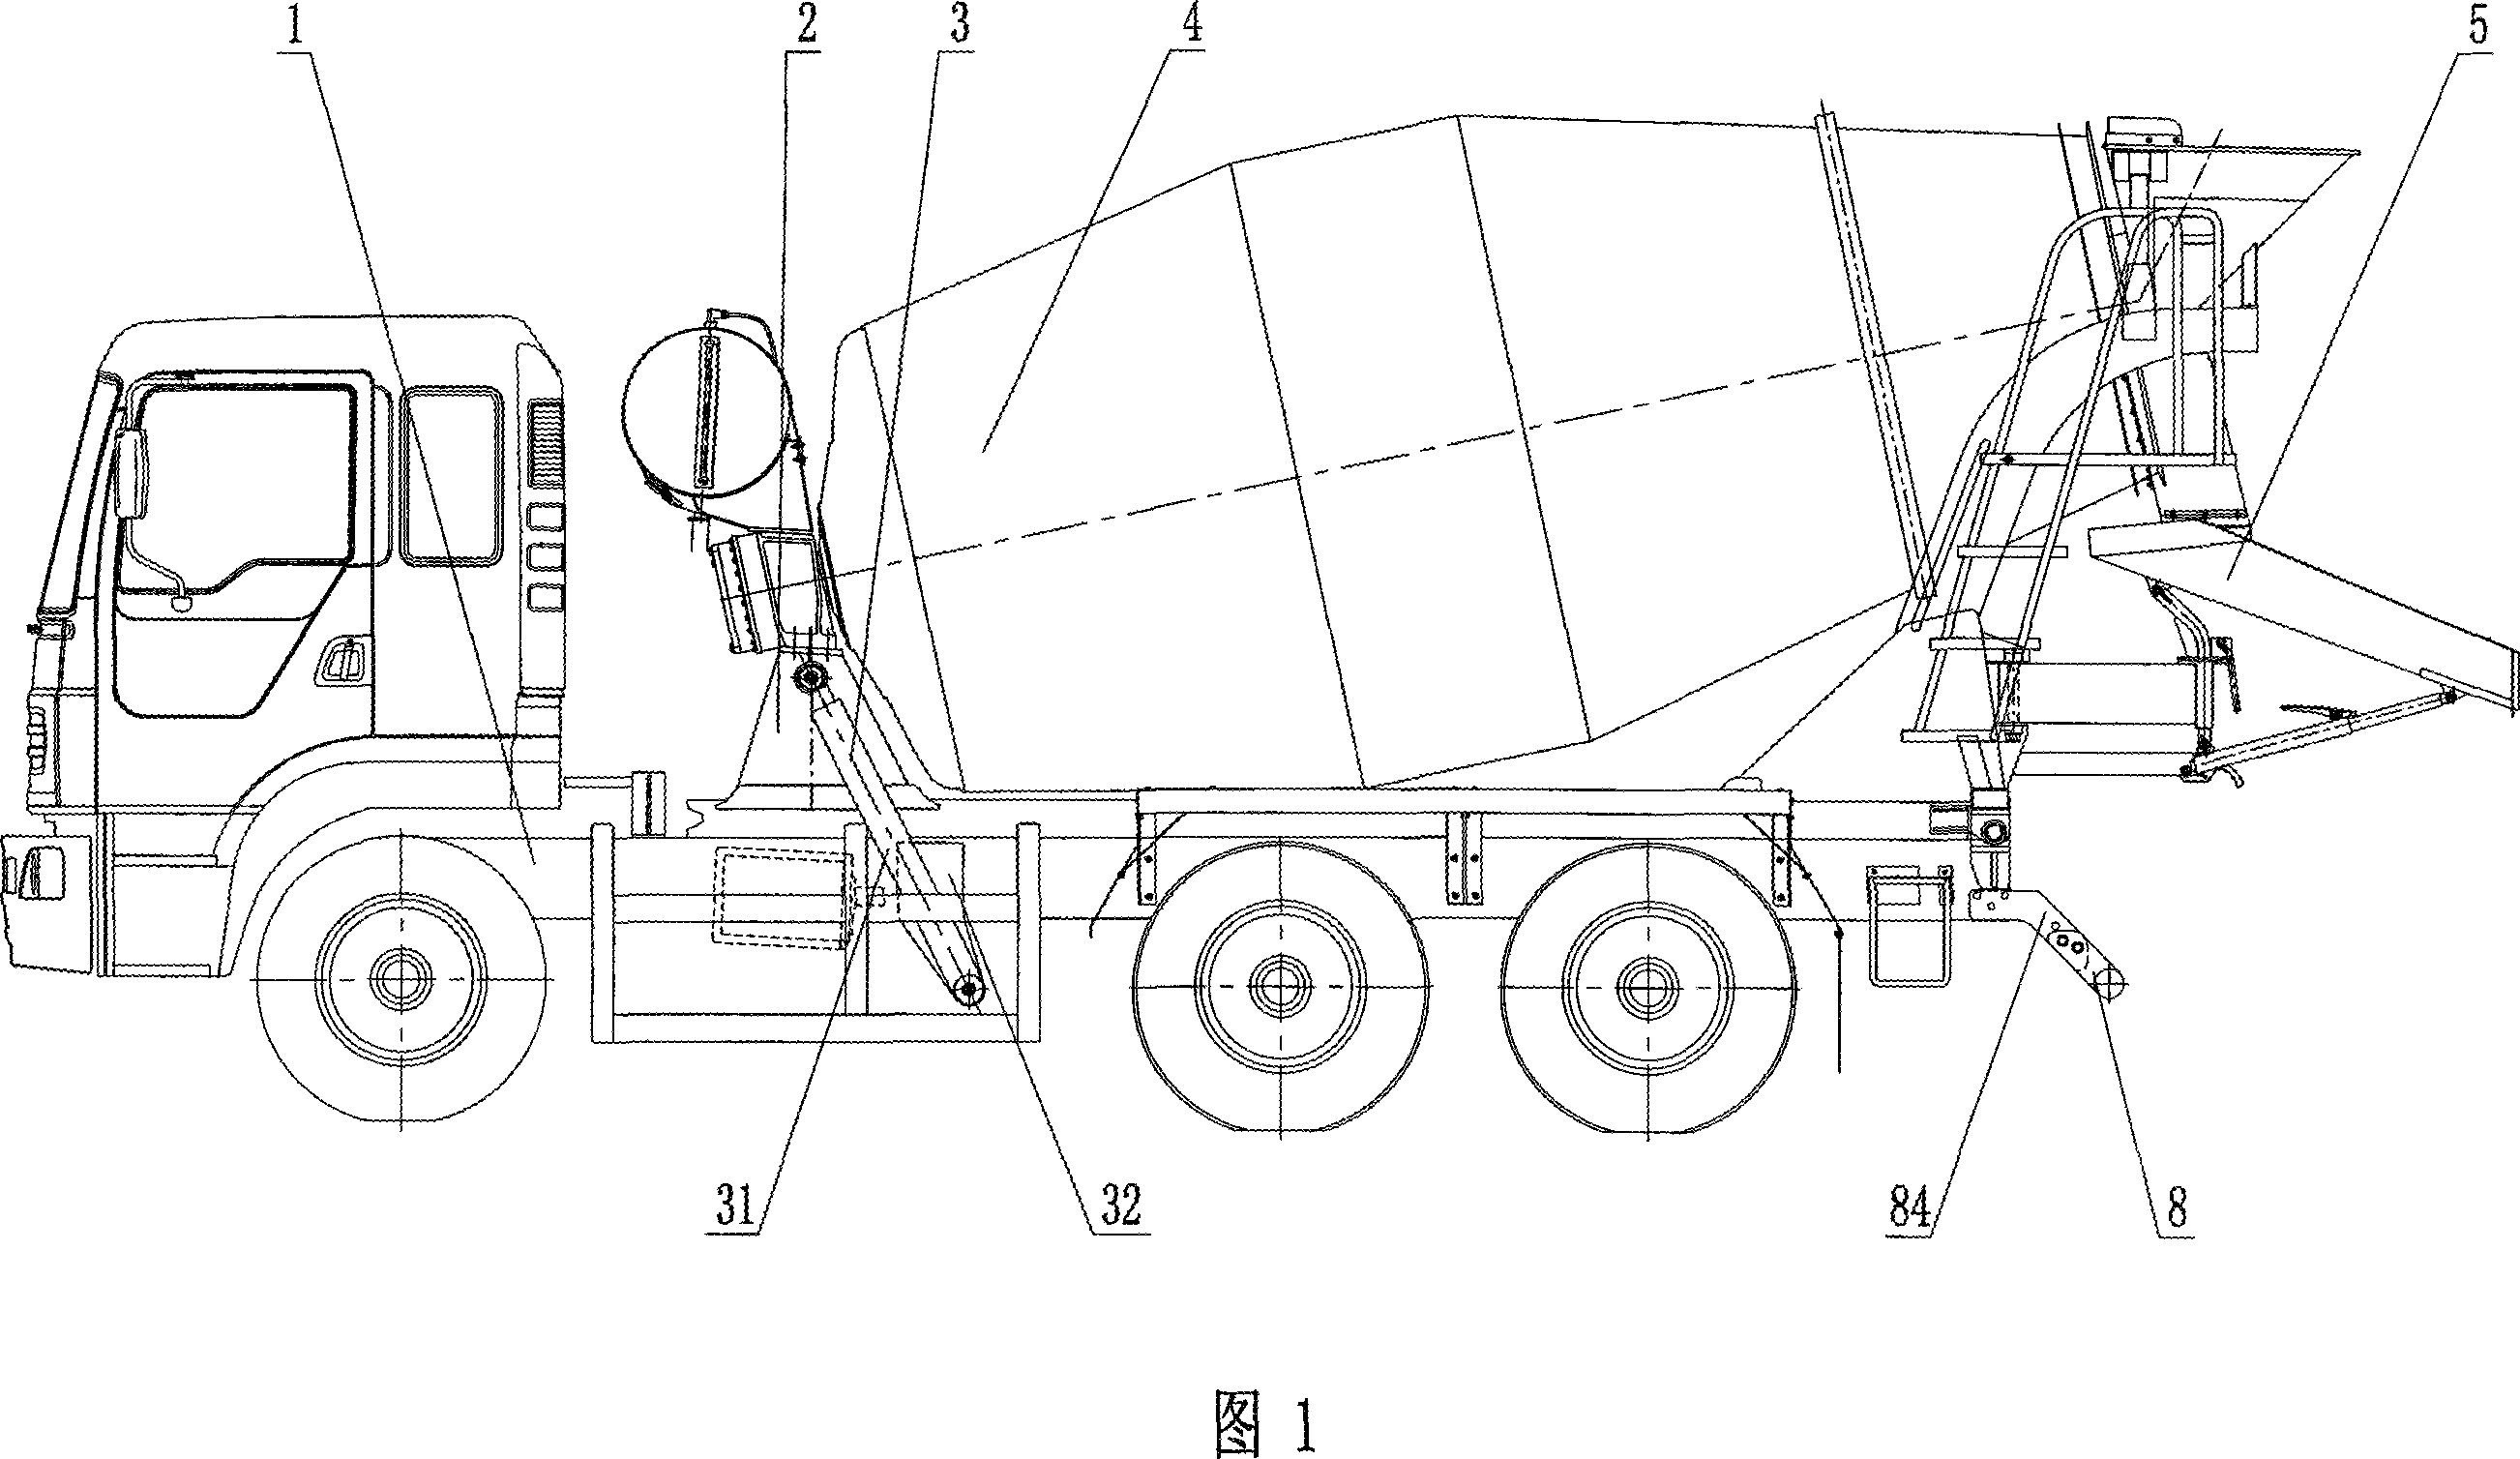 Concrete mixing truck with lifting device